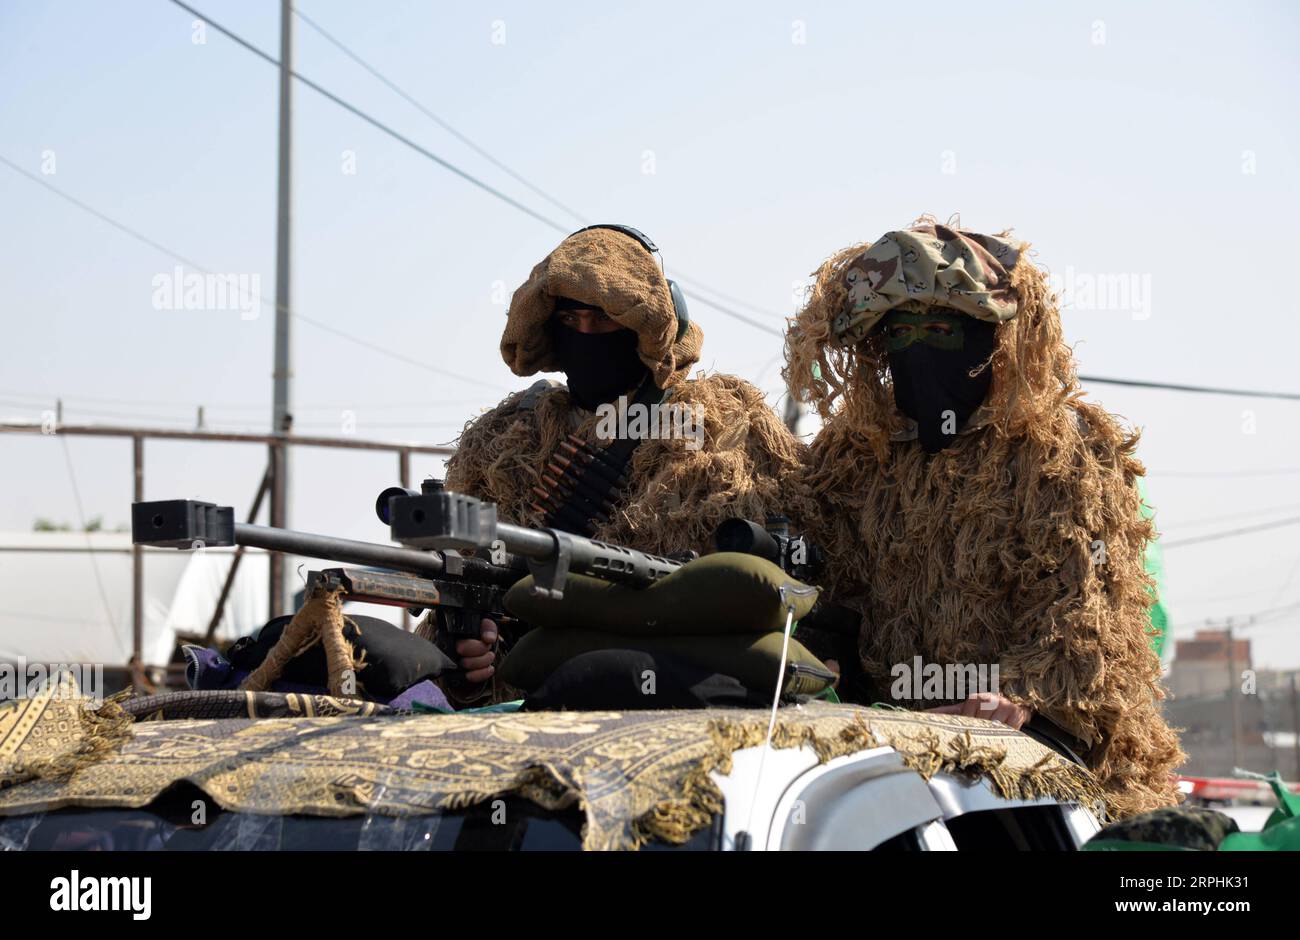 191111 -- GAZA, Nov. 11, 2019 Xinhua -- Palestinian members of al-Qassam Brigades, the armed wing of the Hamas movement, hold their weapons during an anti-Israel military parade in the southern Gaza Strip city of Khan Younis, Nov. 11, 2019. Photo by Rizek Abdeljawad/Xinhua MIDEAST-GAZA-MILITARY-PARADE PUBLICATIONxNOTxINxCHN Stock Photo